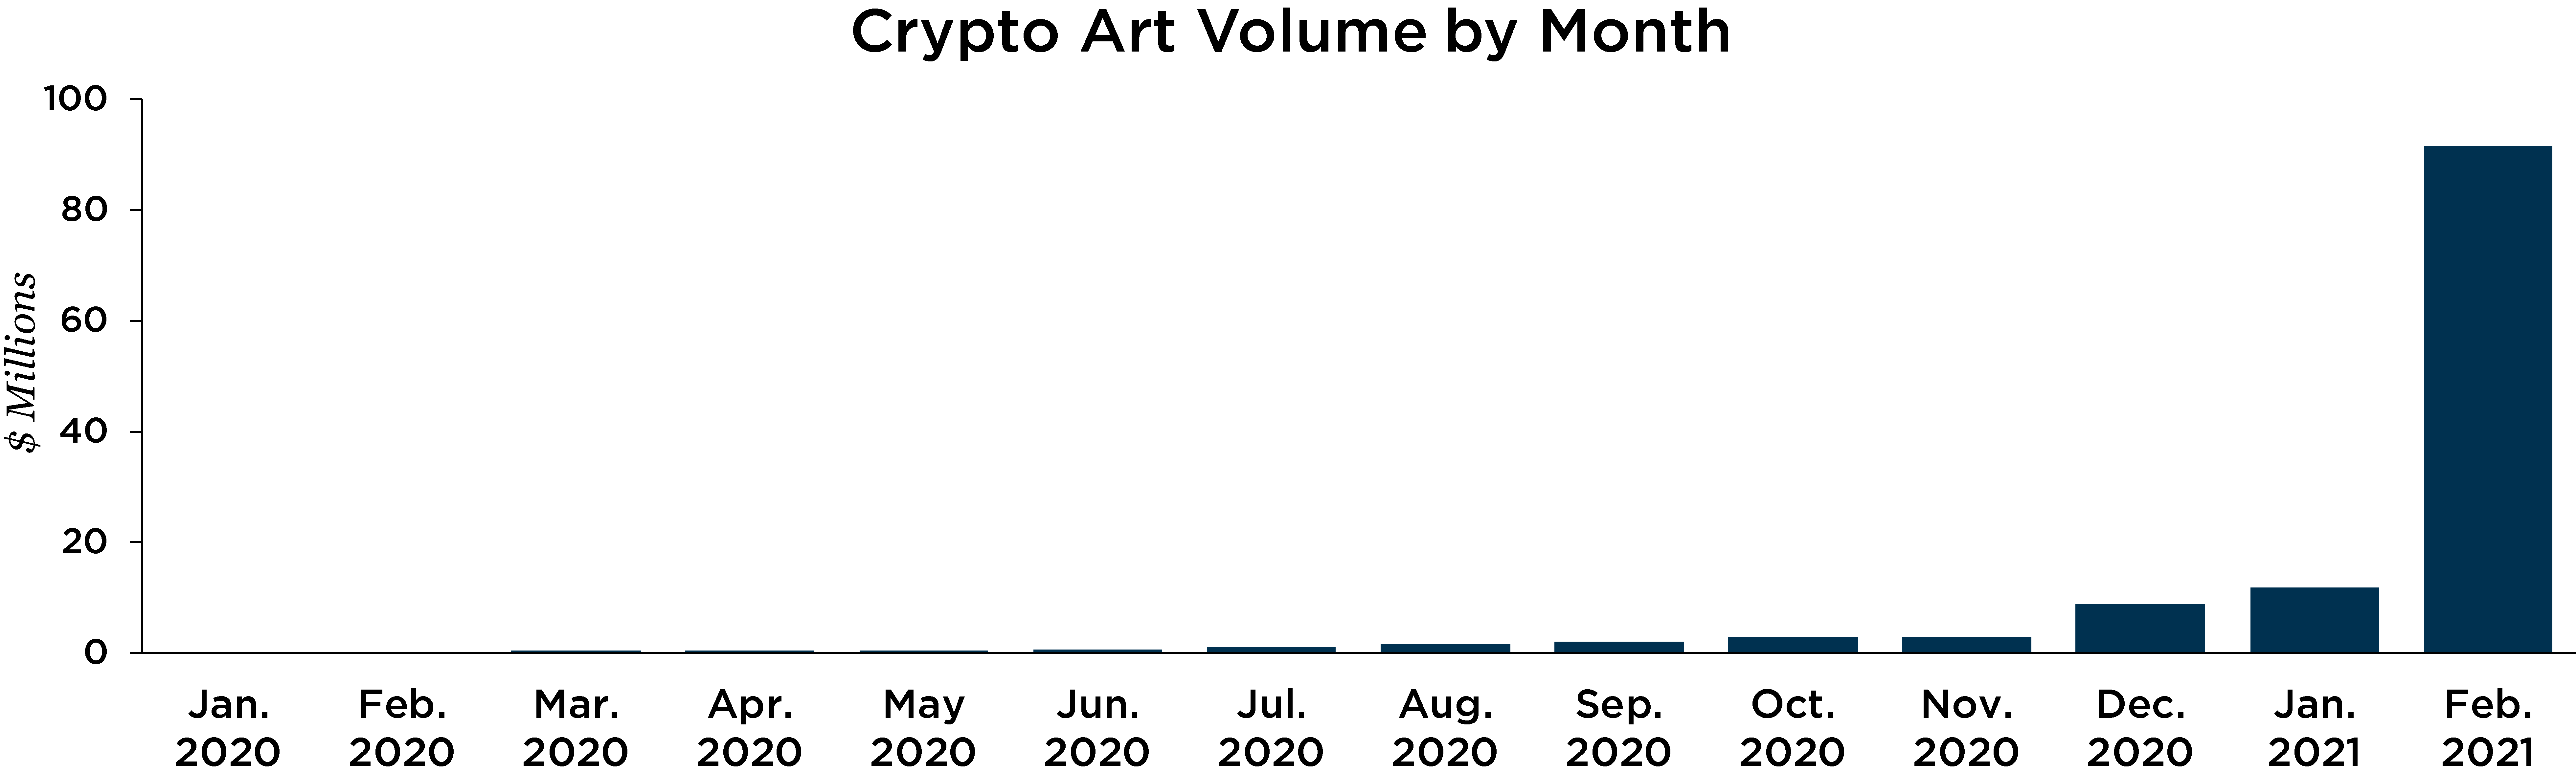 bar chart depicting "Crypto Art Volume By Month" from January 2020 to February 2021